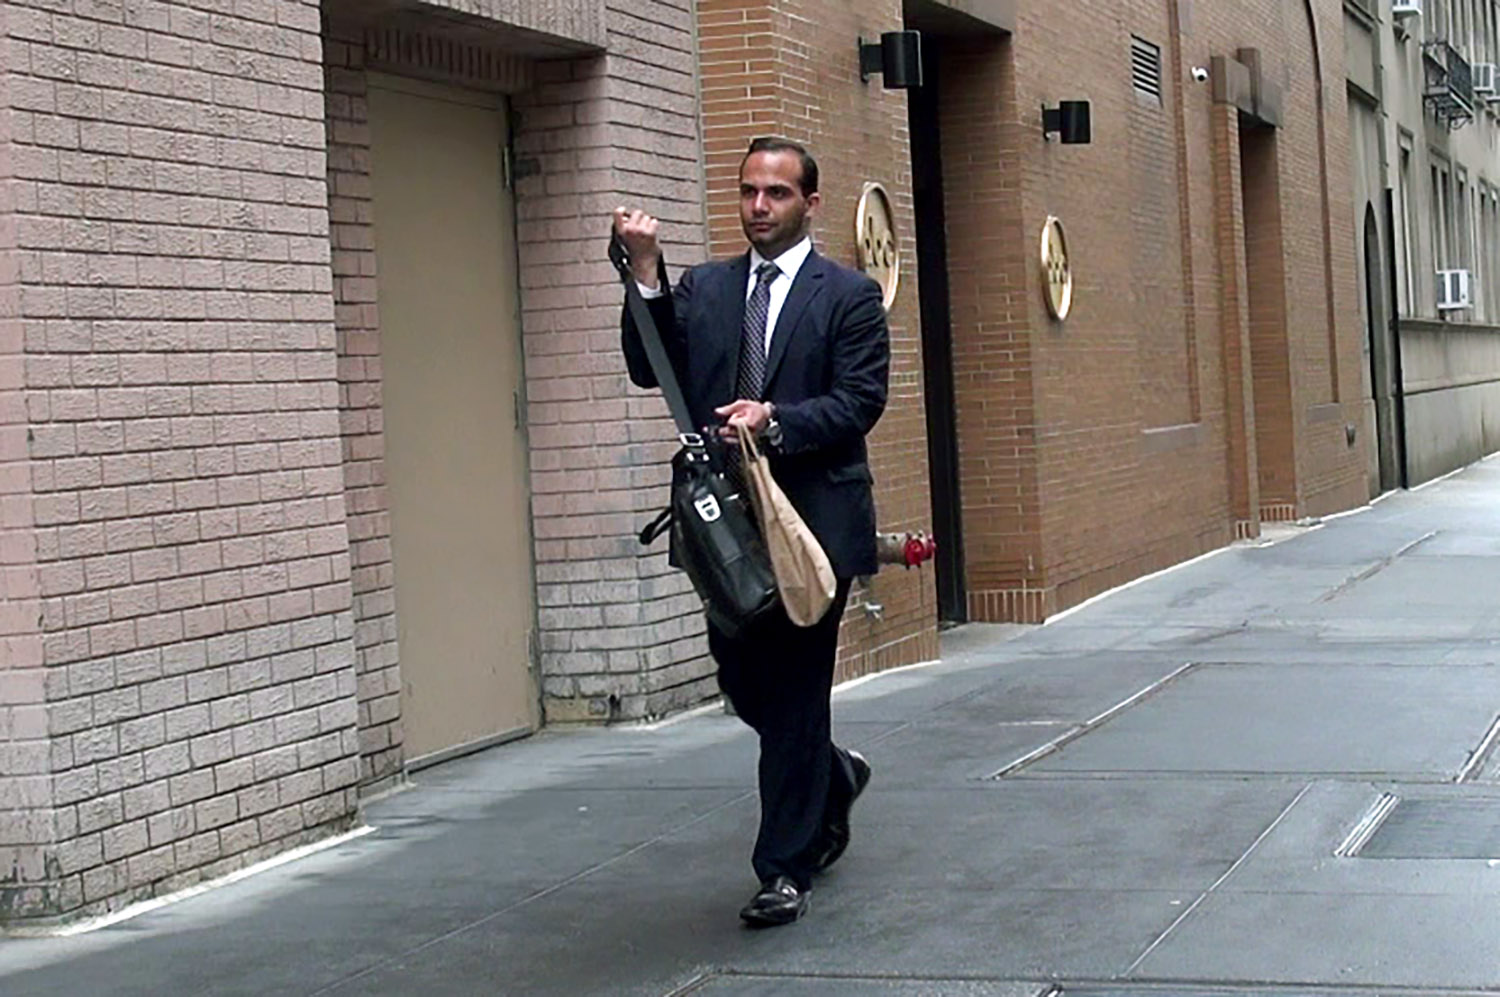 PHOTO: George Papadopoulos, a Trump campaign foreign policy adviser, seen here in April 2017 in New York City, pleaded guilty to making false statements to FBI agents.